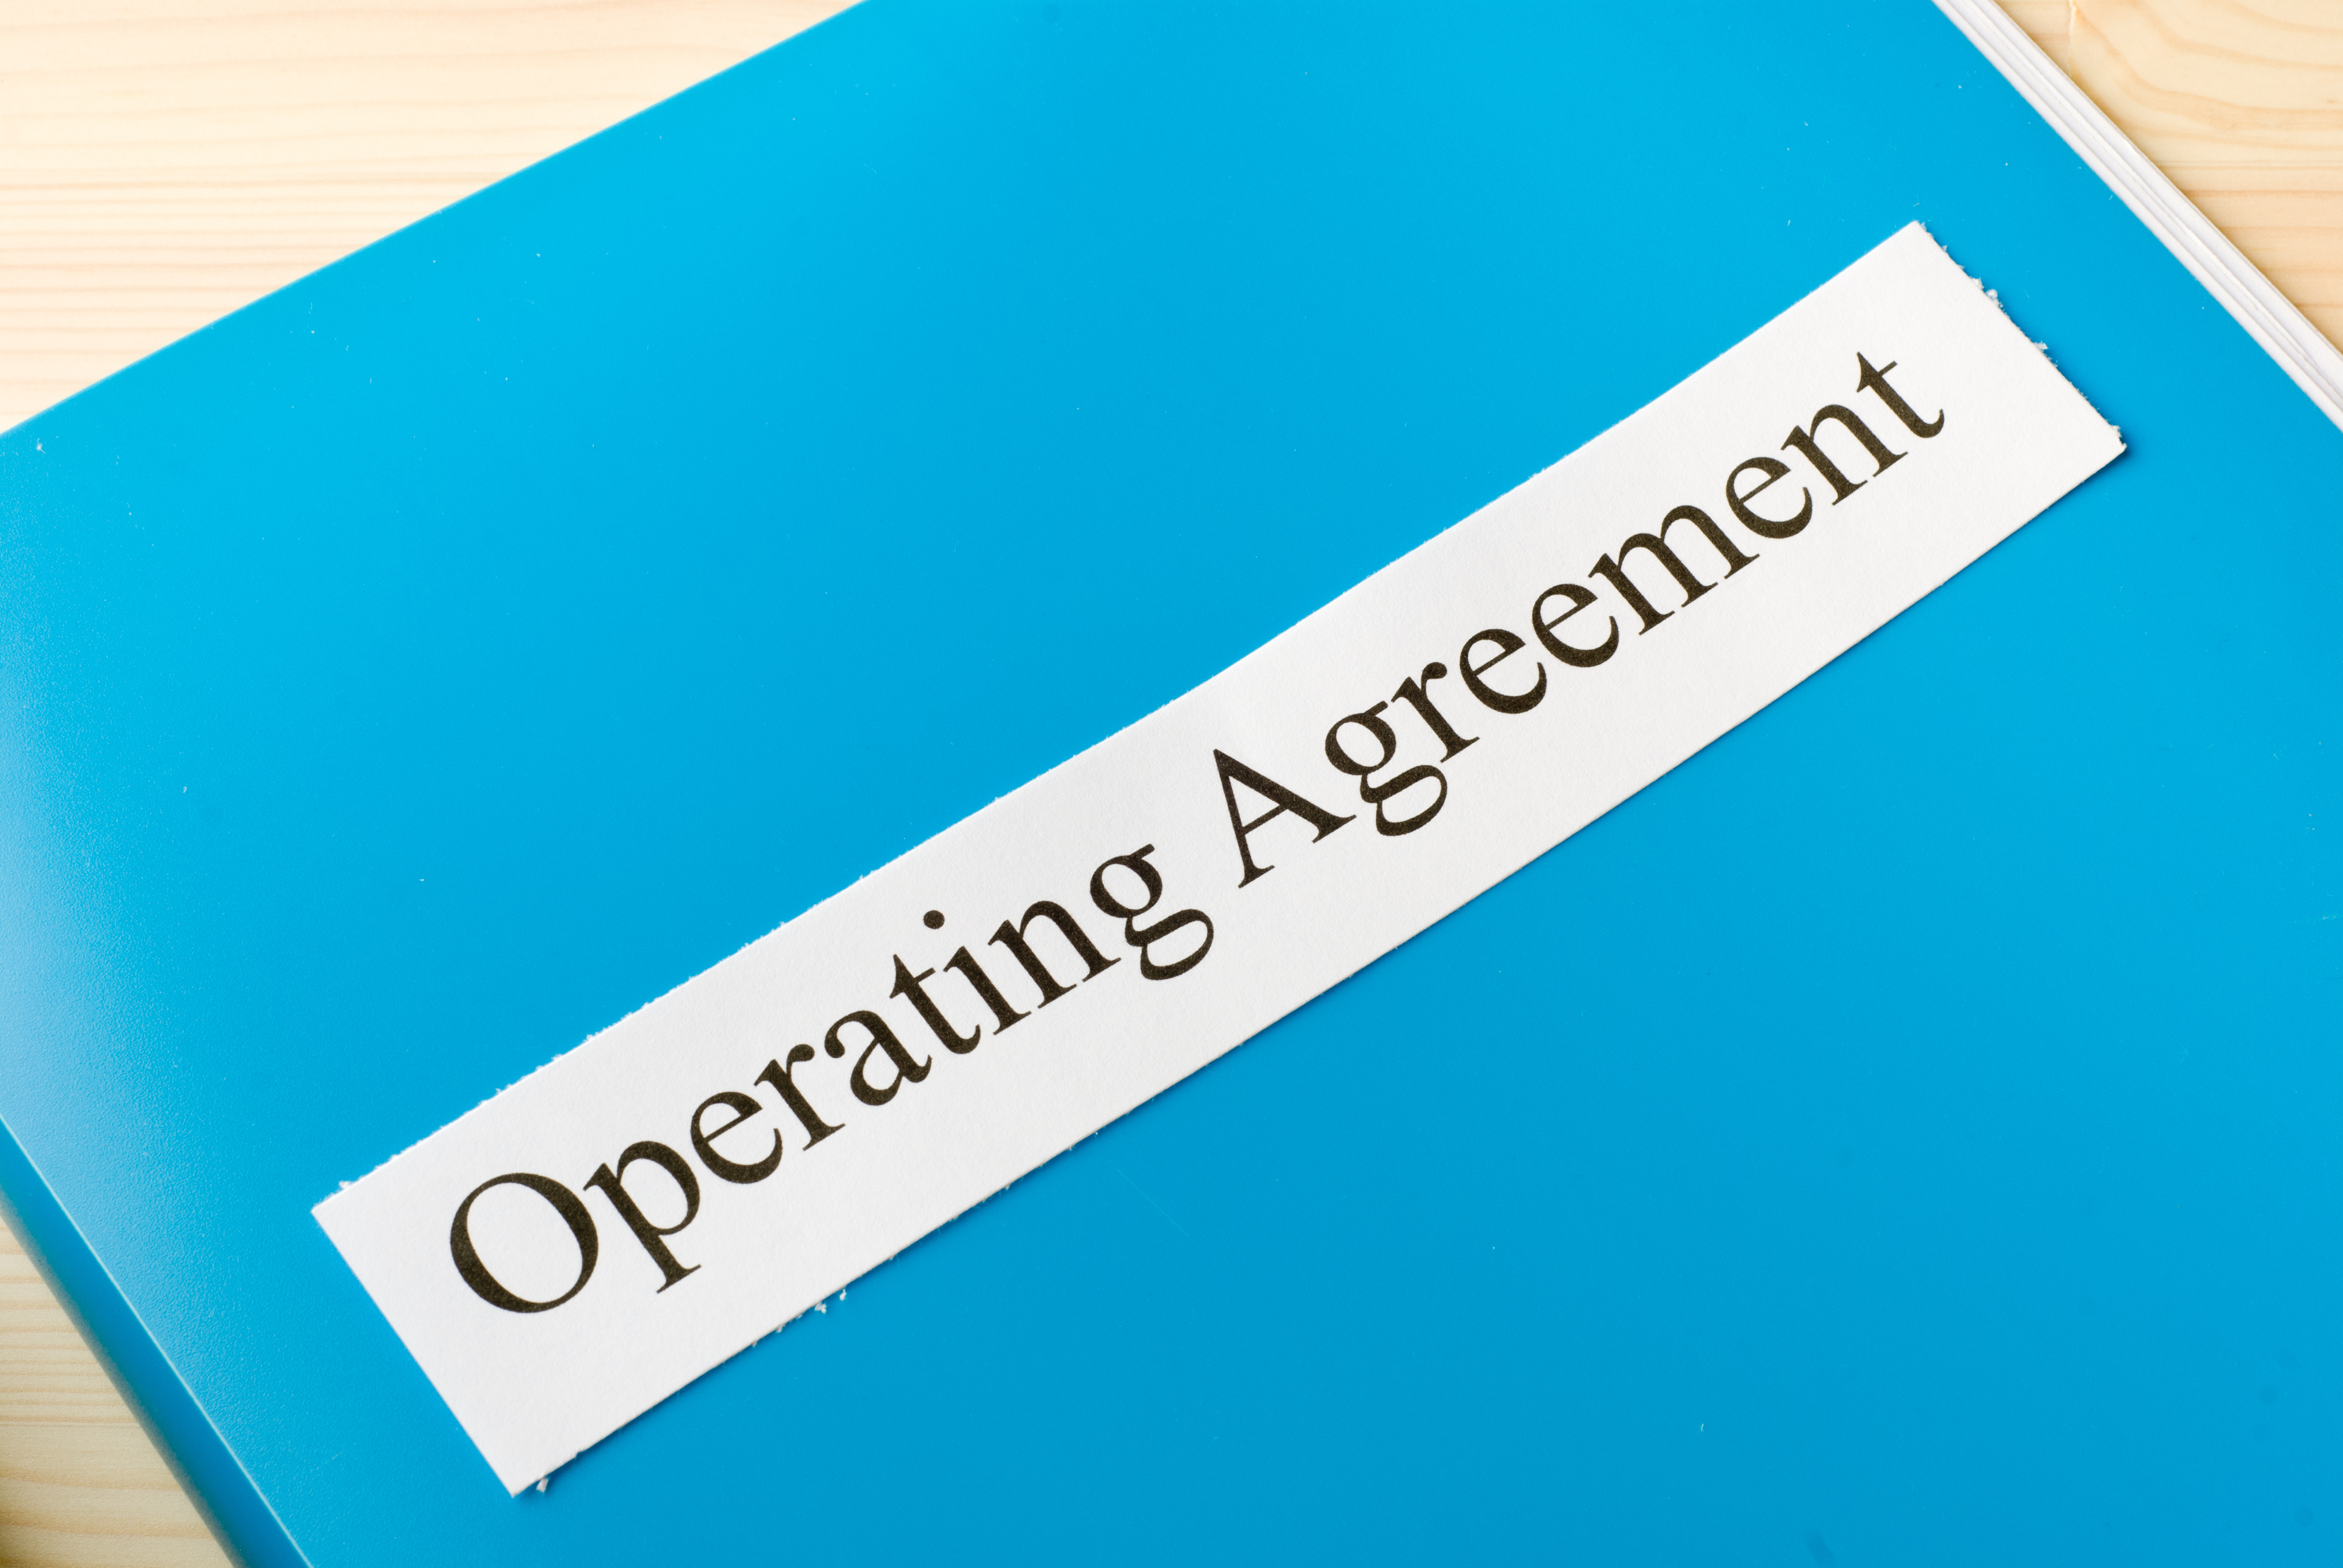 simple-operating-agreement Draft an Opetrating Agreement